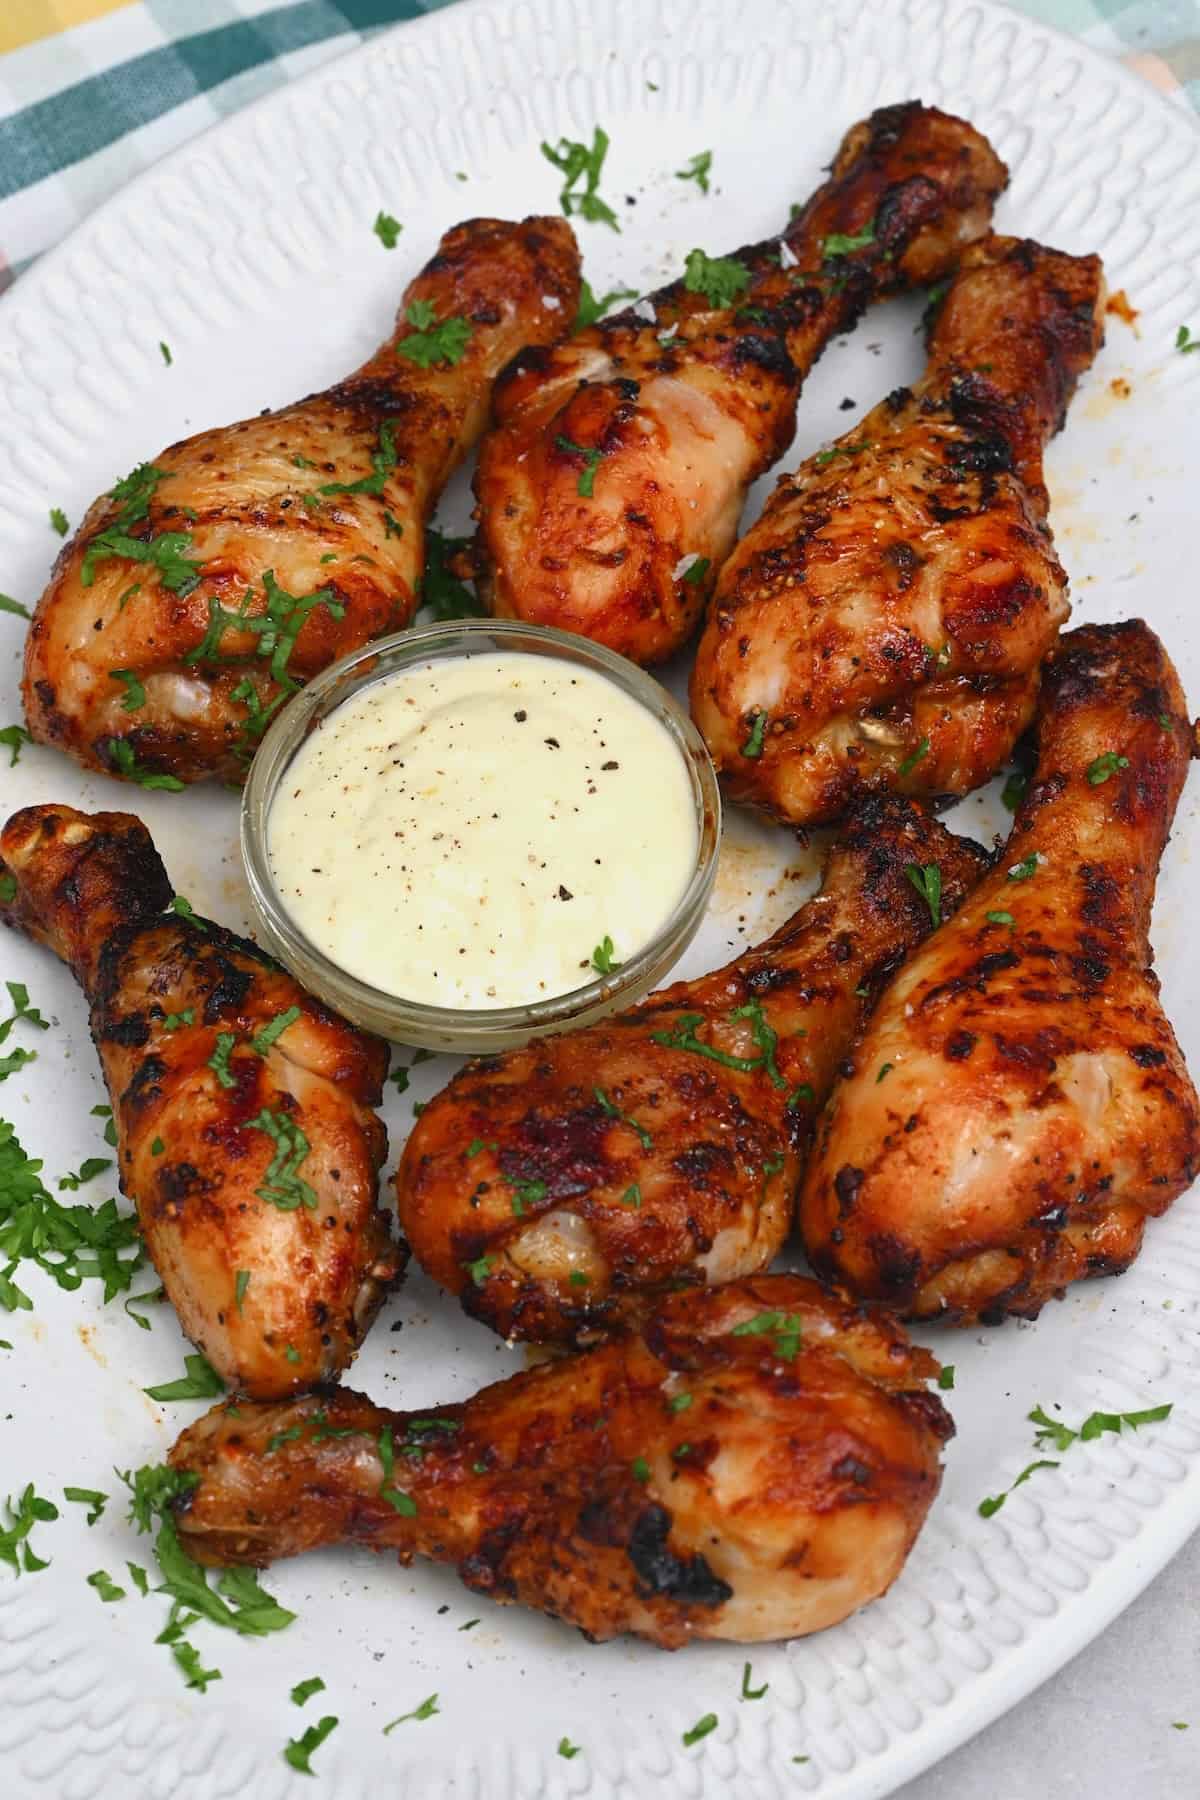 Chicken drumsticks with white sauce in a small bowl